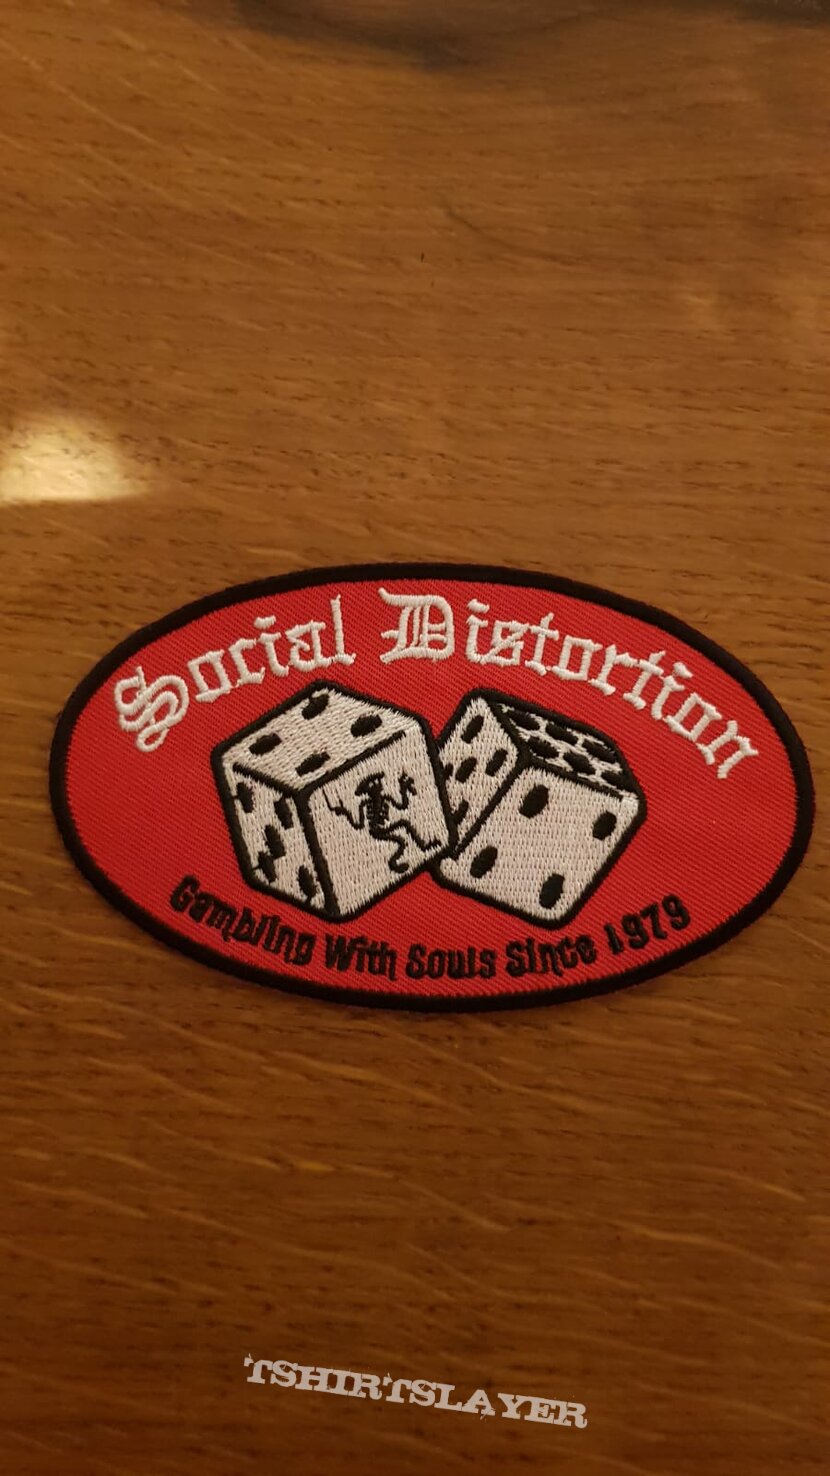 Social Distortion - Gamblin with souls since 1979 Patch